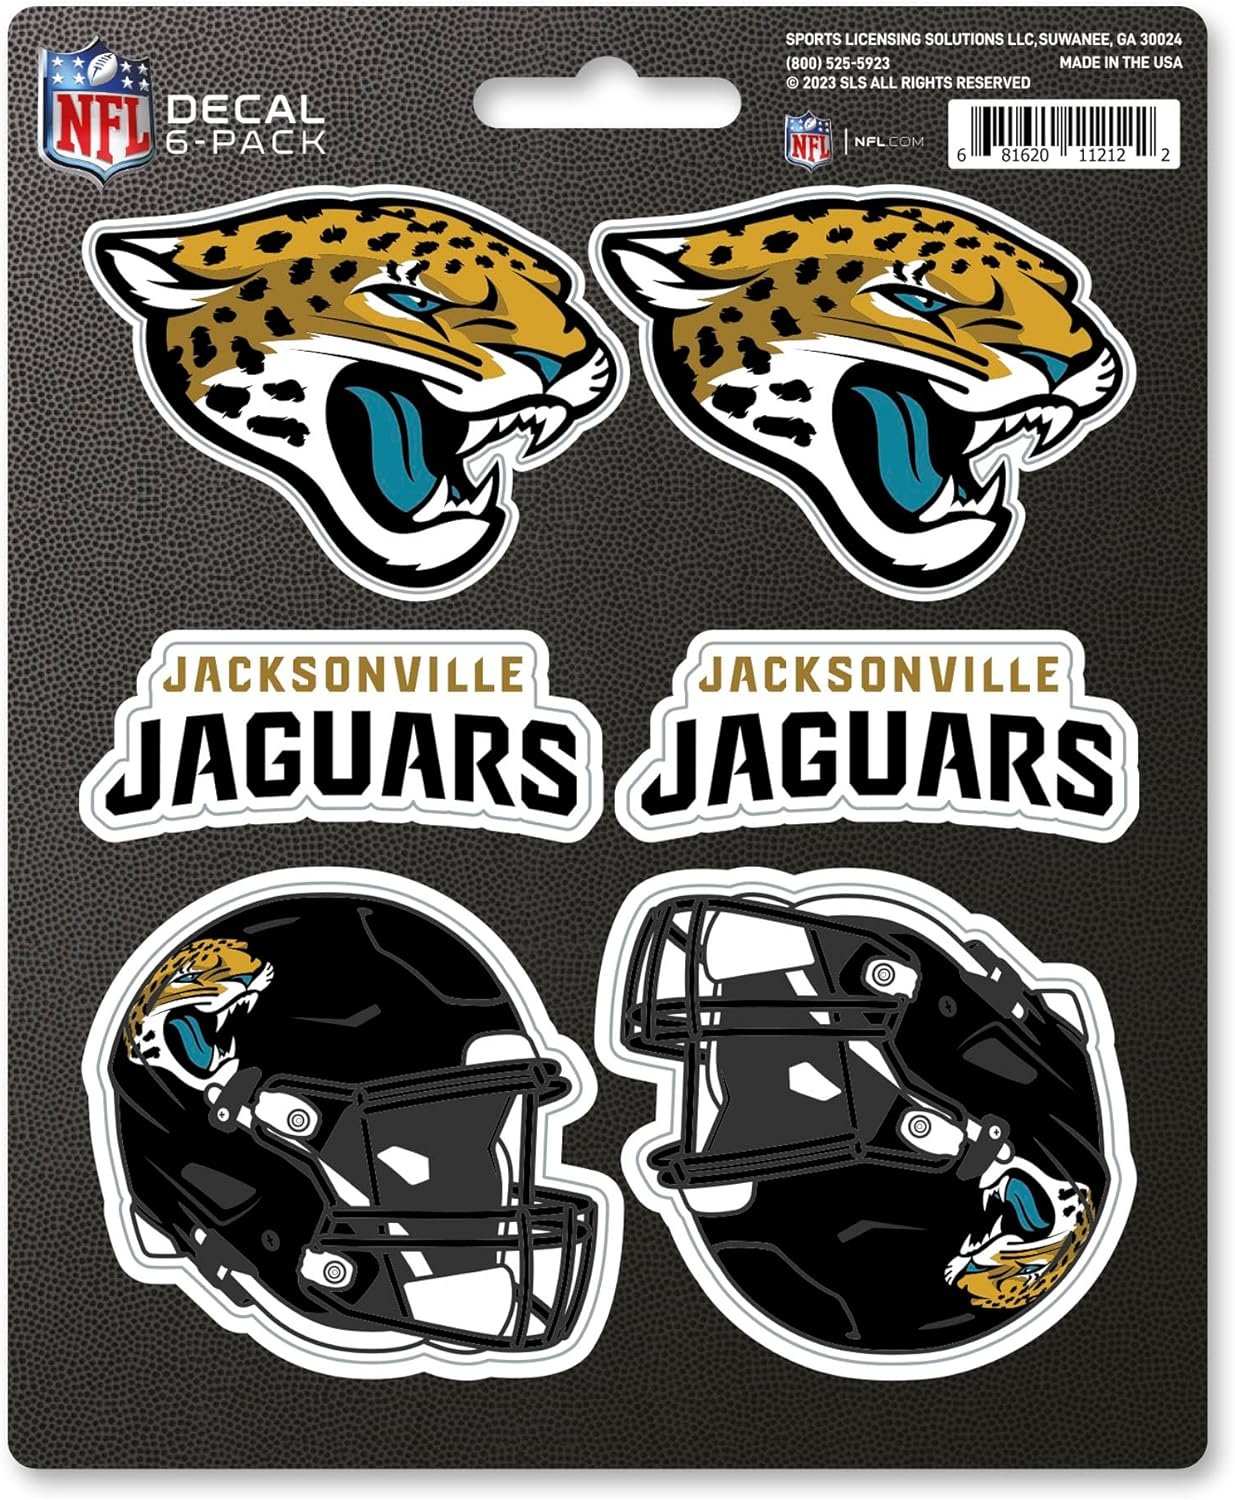 Jacksonville Jaguars 6-Piece Decal Sticker Set, 5x6 Inch Sheet, Gift for football fans for any hard surfaces around home, automotive, personal items